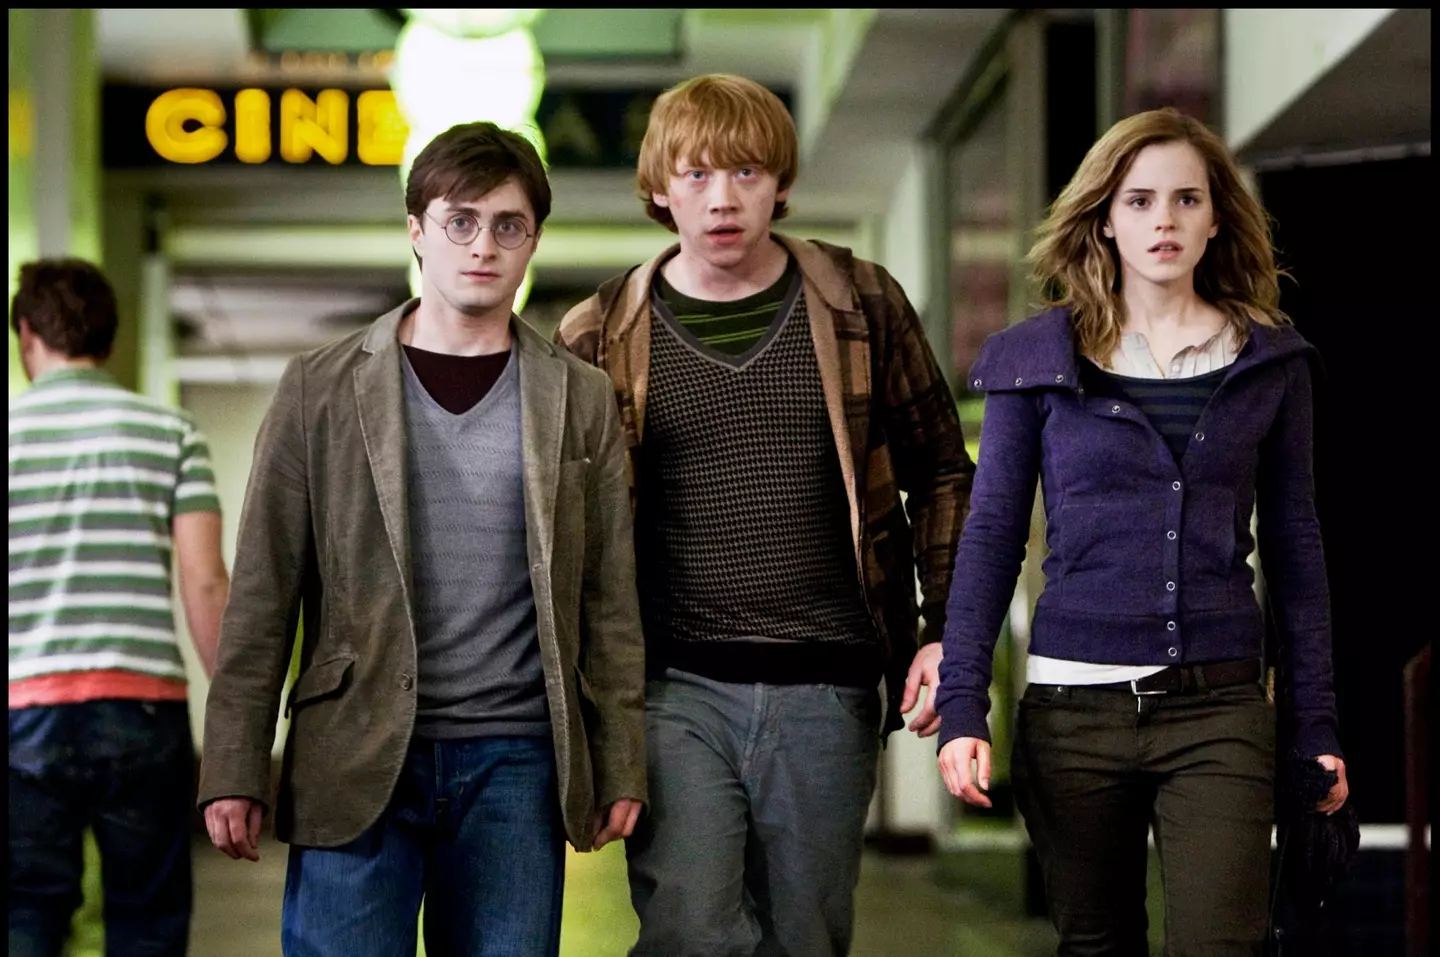 Daniel Radcliffe is hesitant about rejoining the franchise.